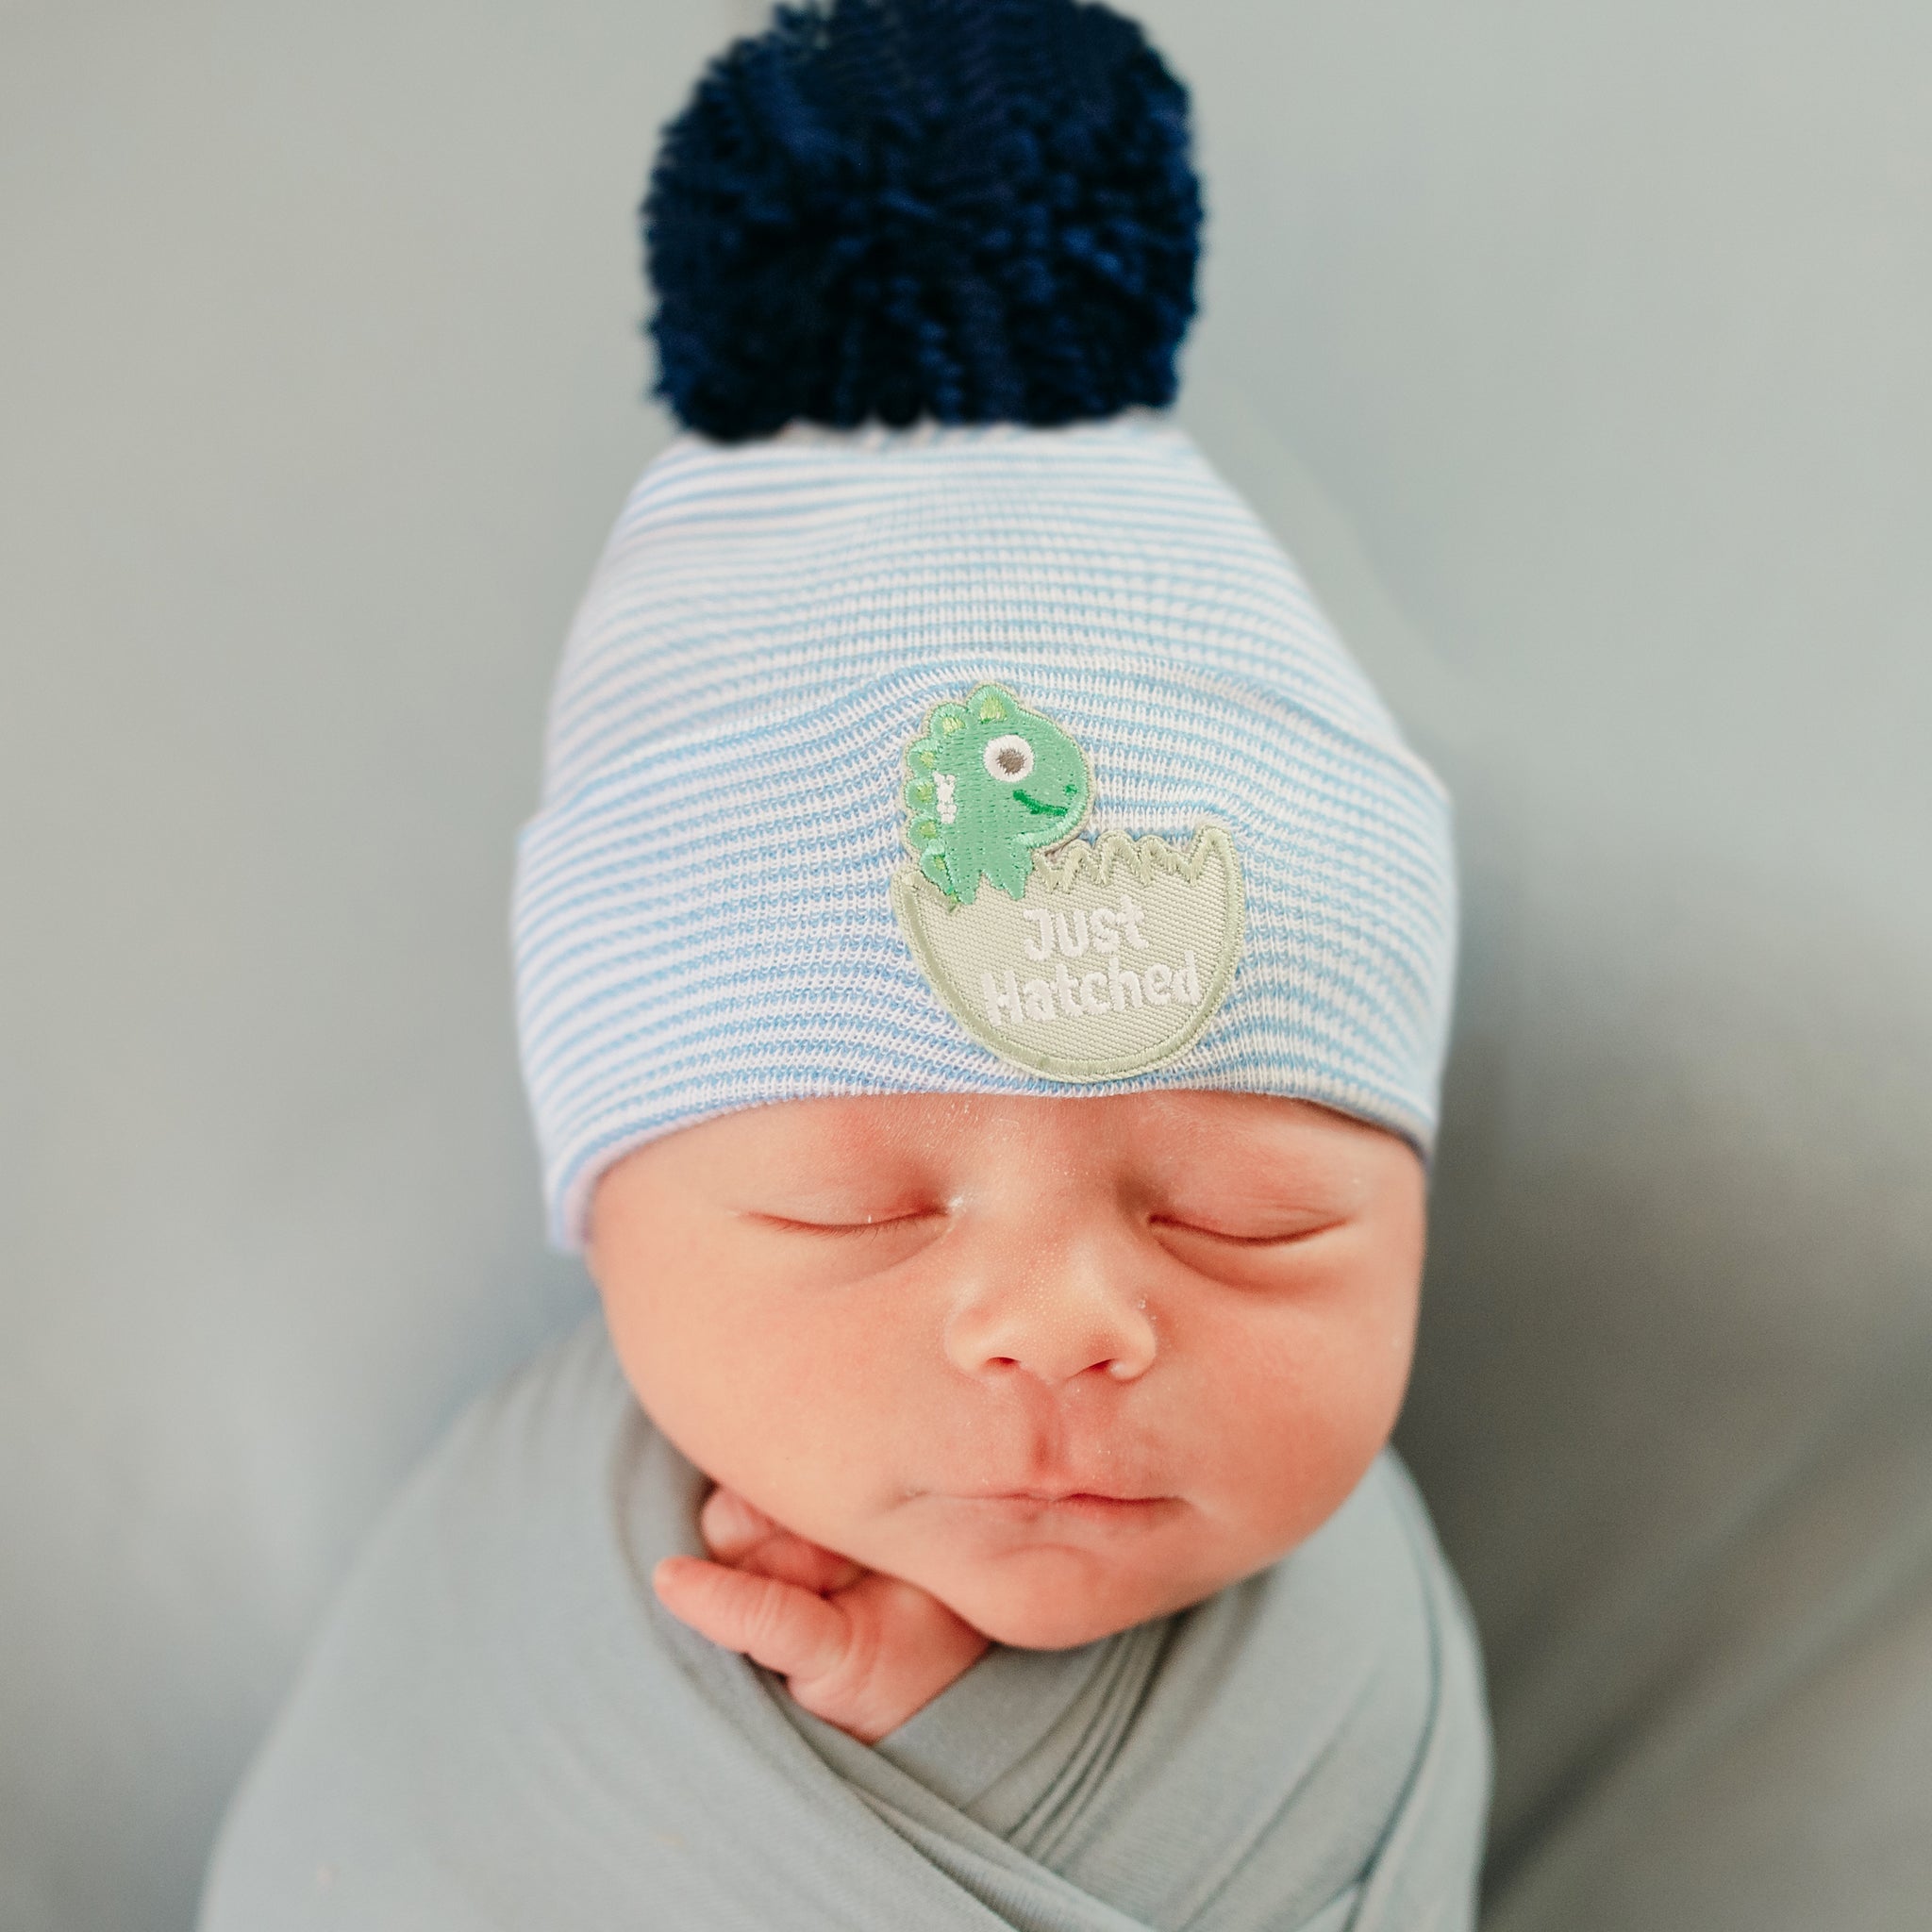 ilybean JUST HATCHED Striped Blue and White Striped Newborn Boy Hospital Hat with Navy Pom